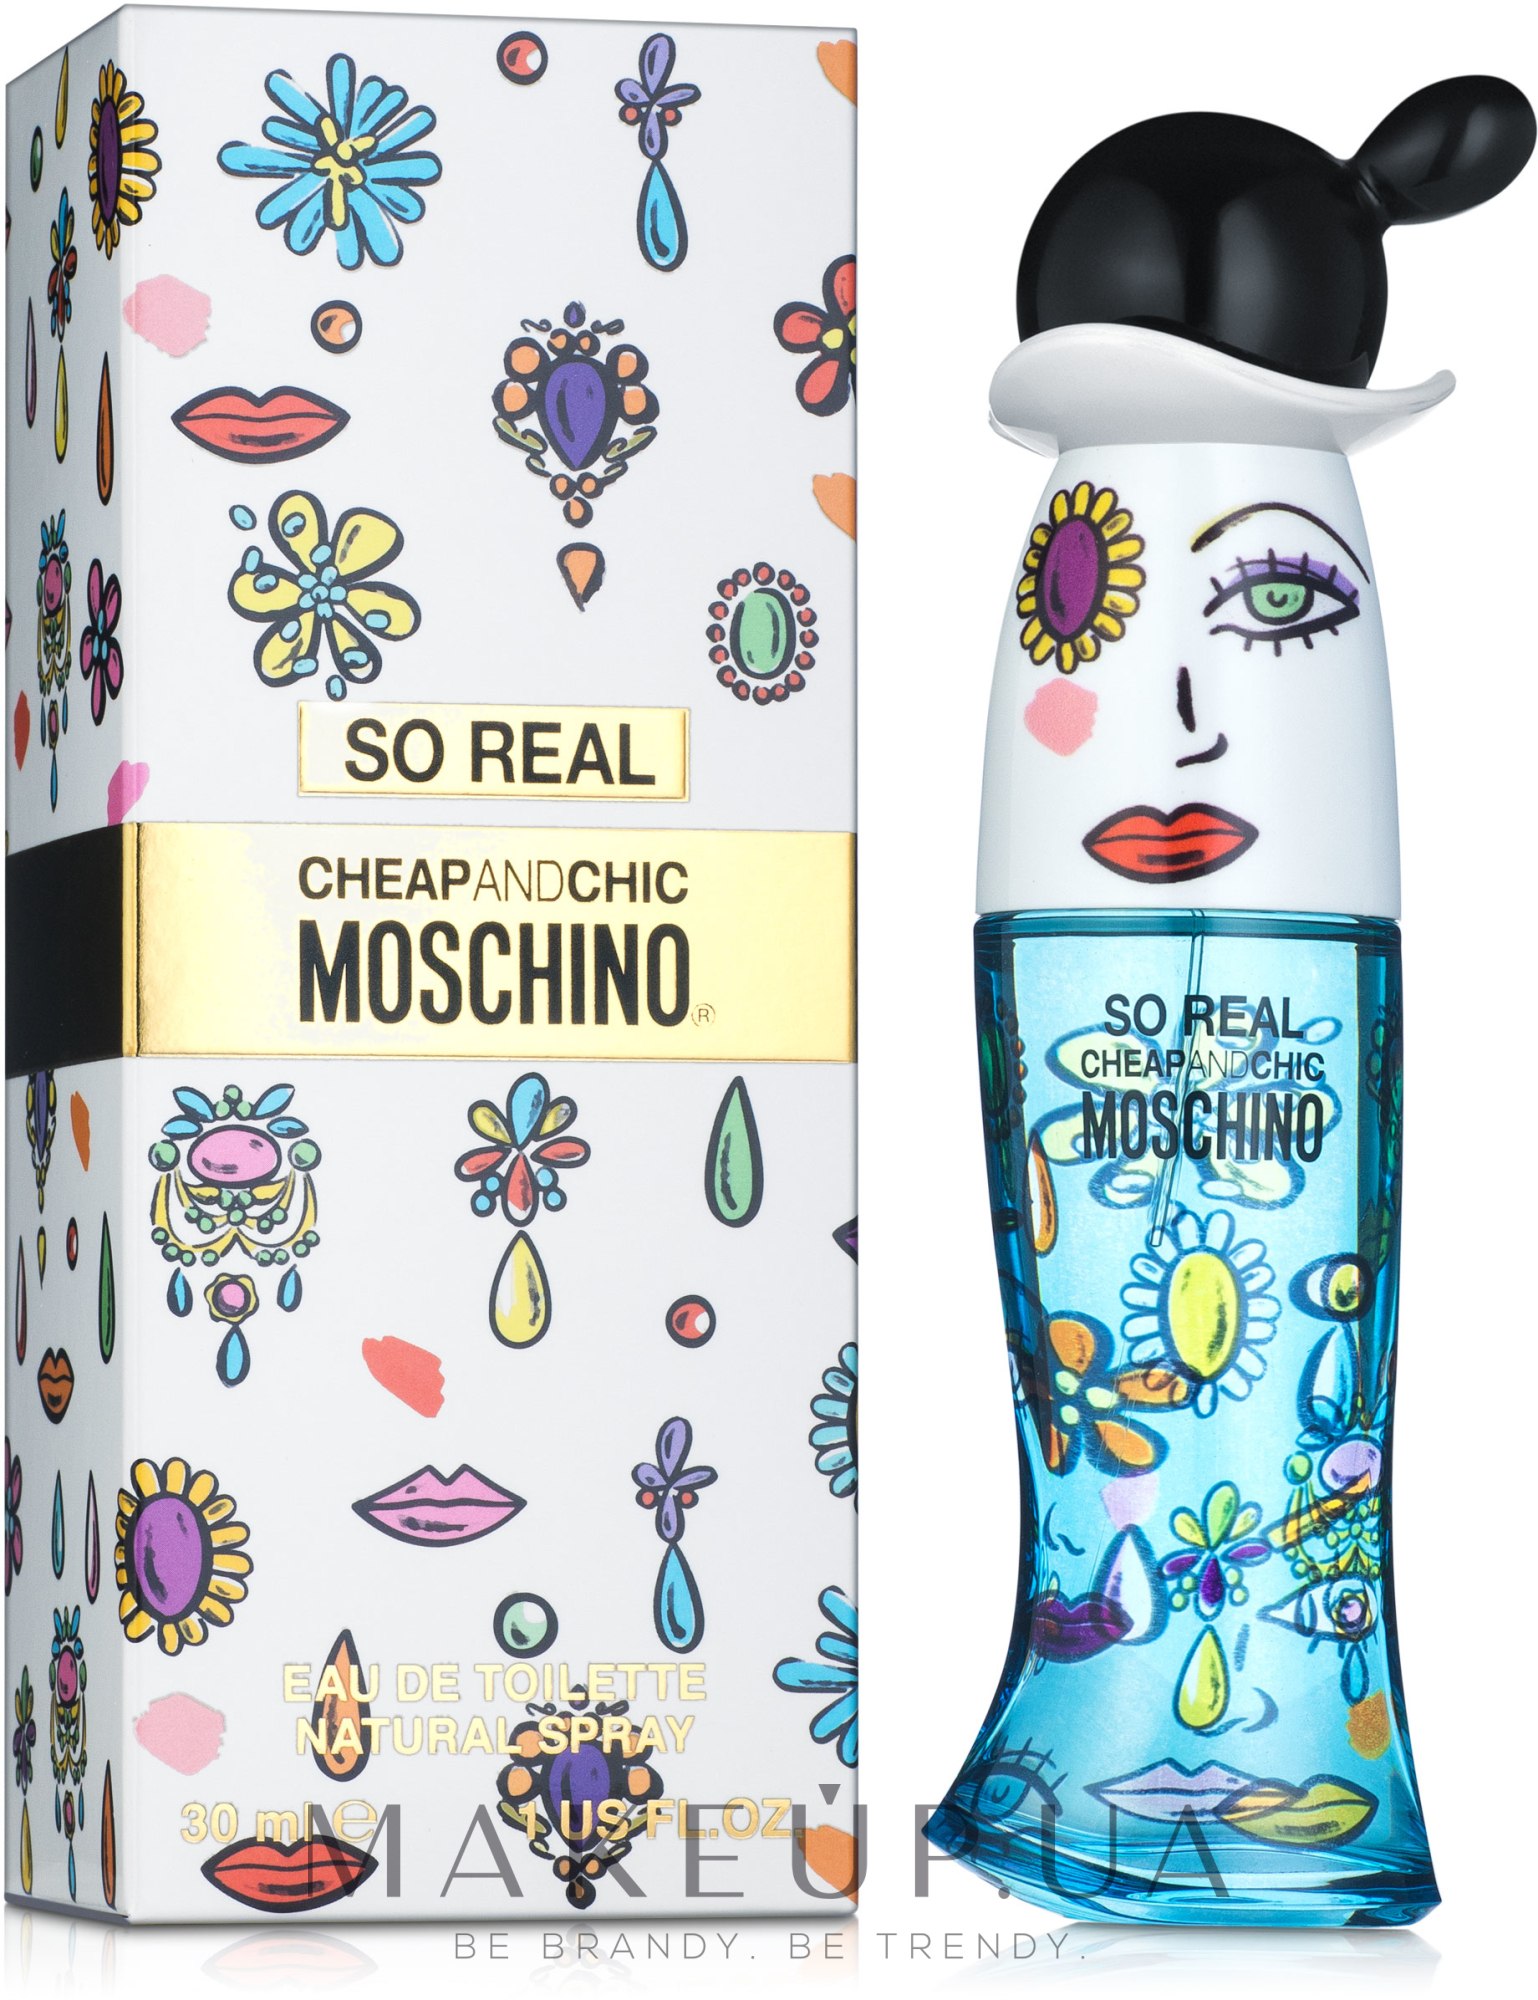 Духи москино отзывы. Moschino so real cheap and Chic туалетная вода женская. Moschino cheap & Chic so real туалетная вода 100 мл.. Moschino so real cheap and Chic туалетная вода 30 мл. Moschino so real cheap & Chic EDT Spray 100ml.